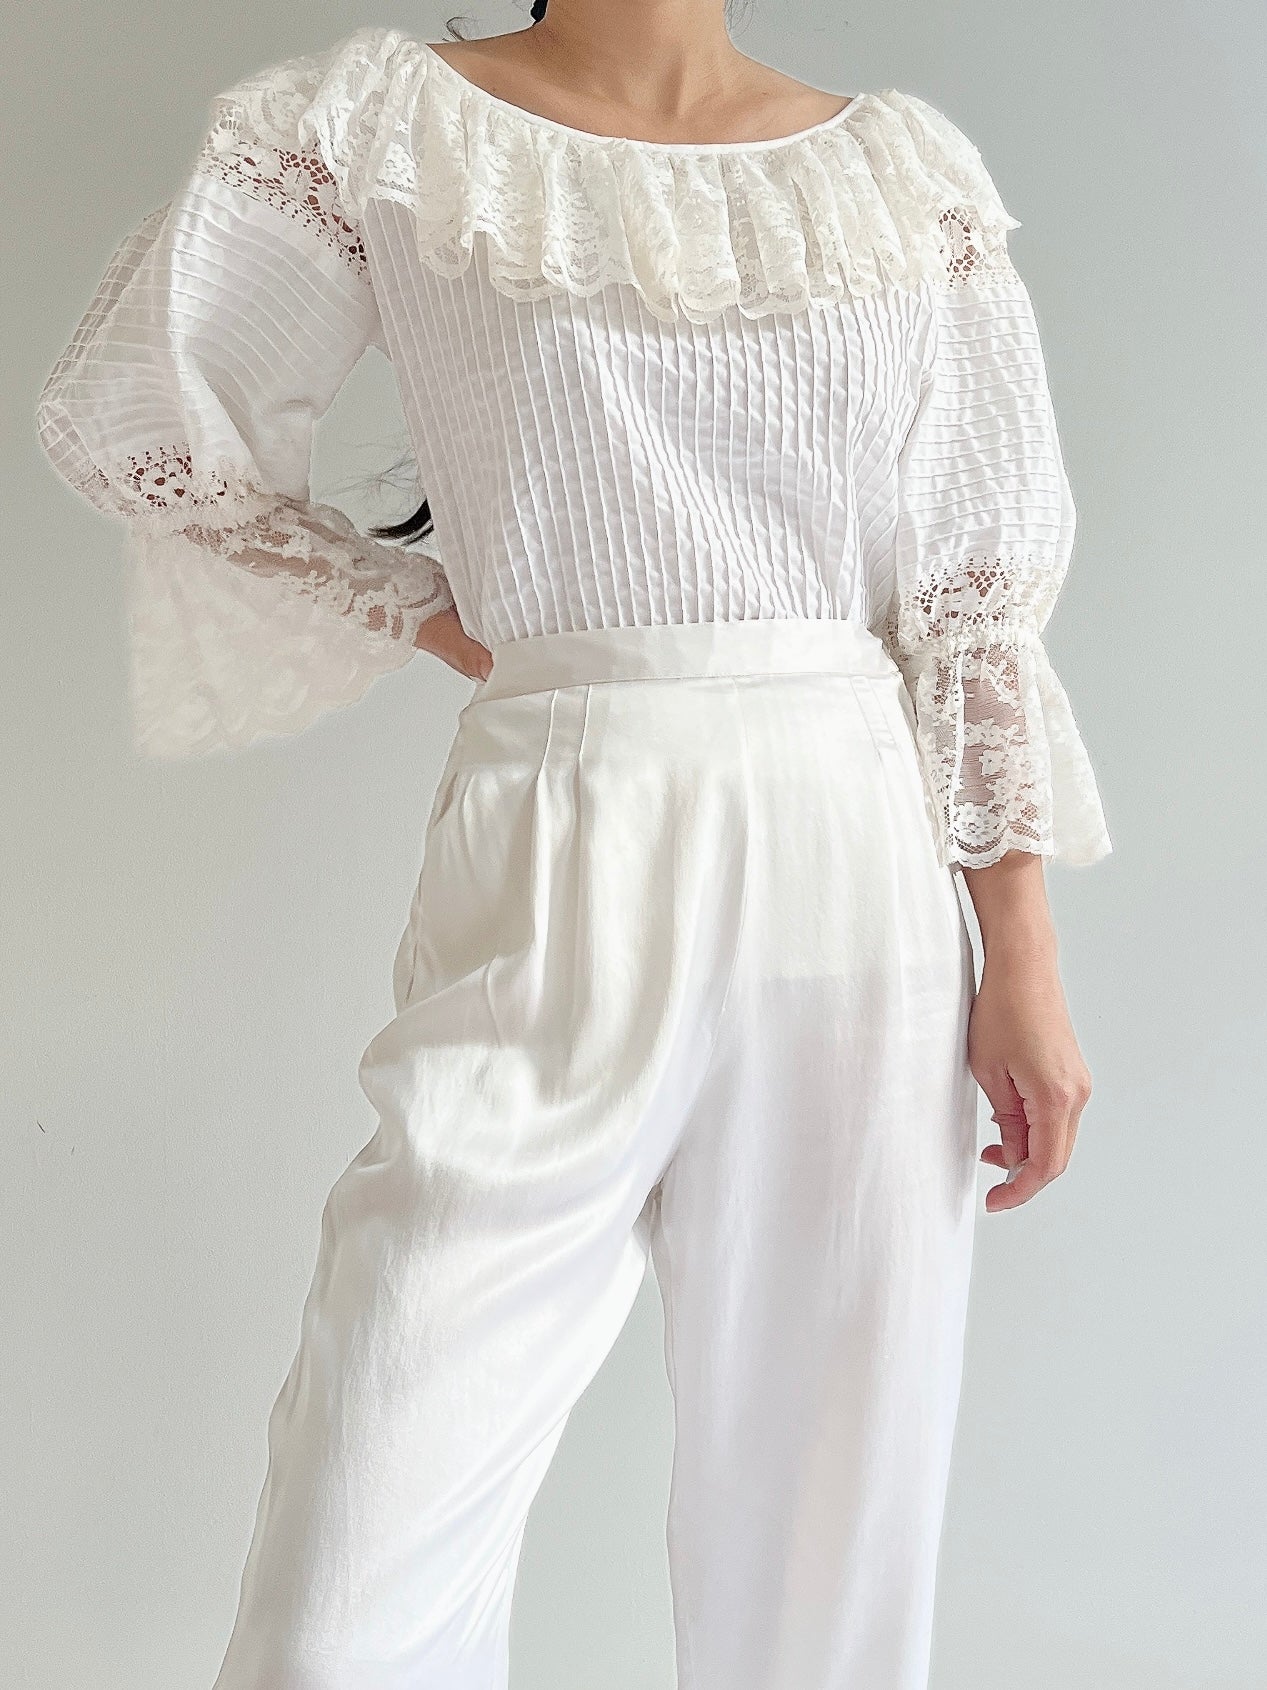 1970s Cotton Puffed Sleeves Top - M/L